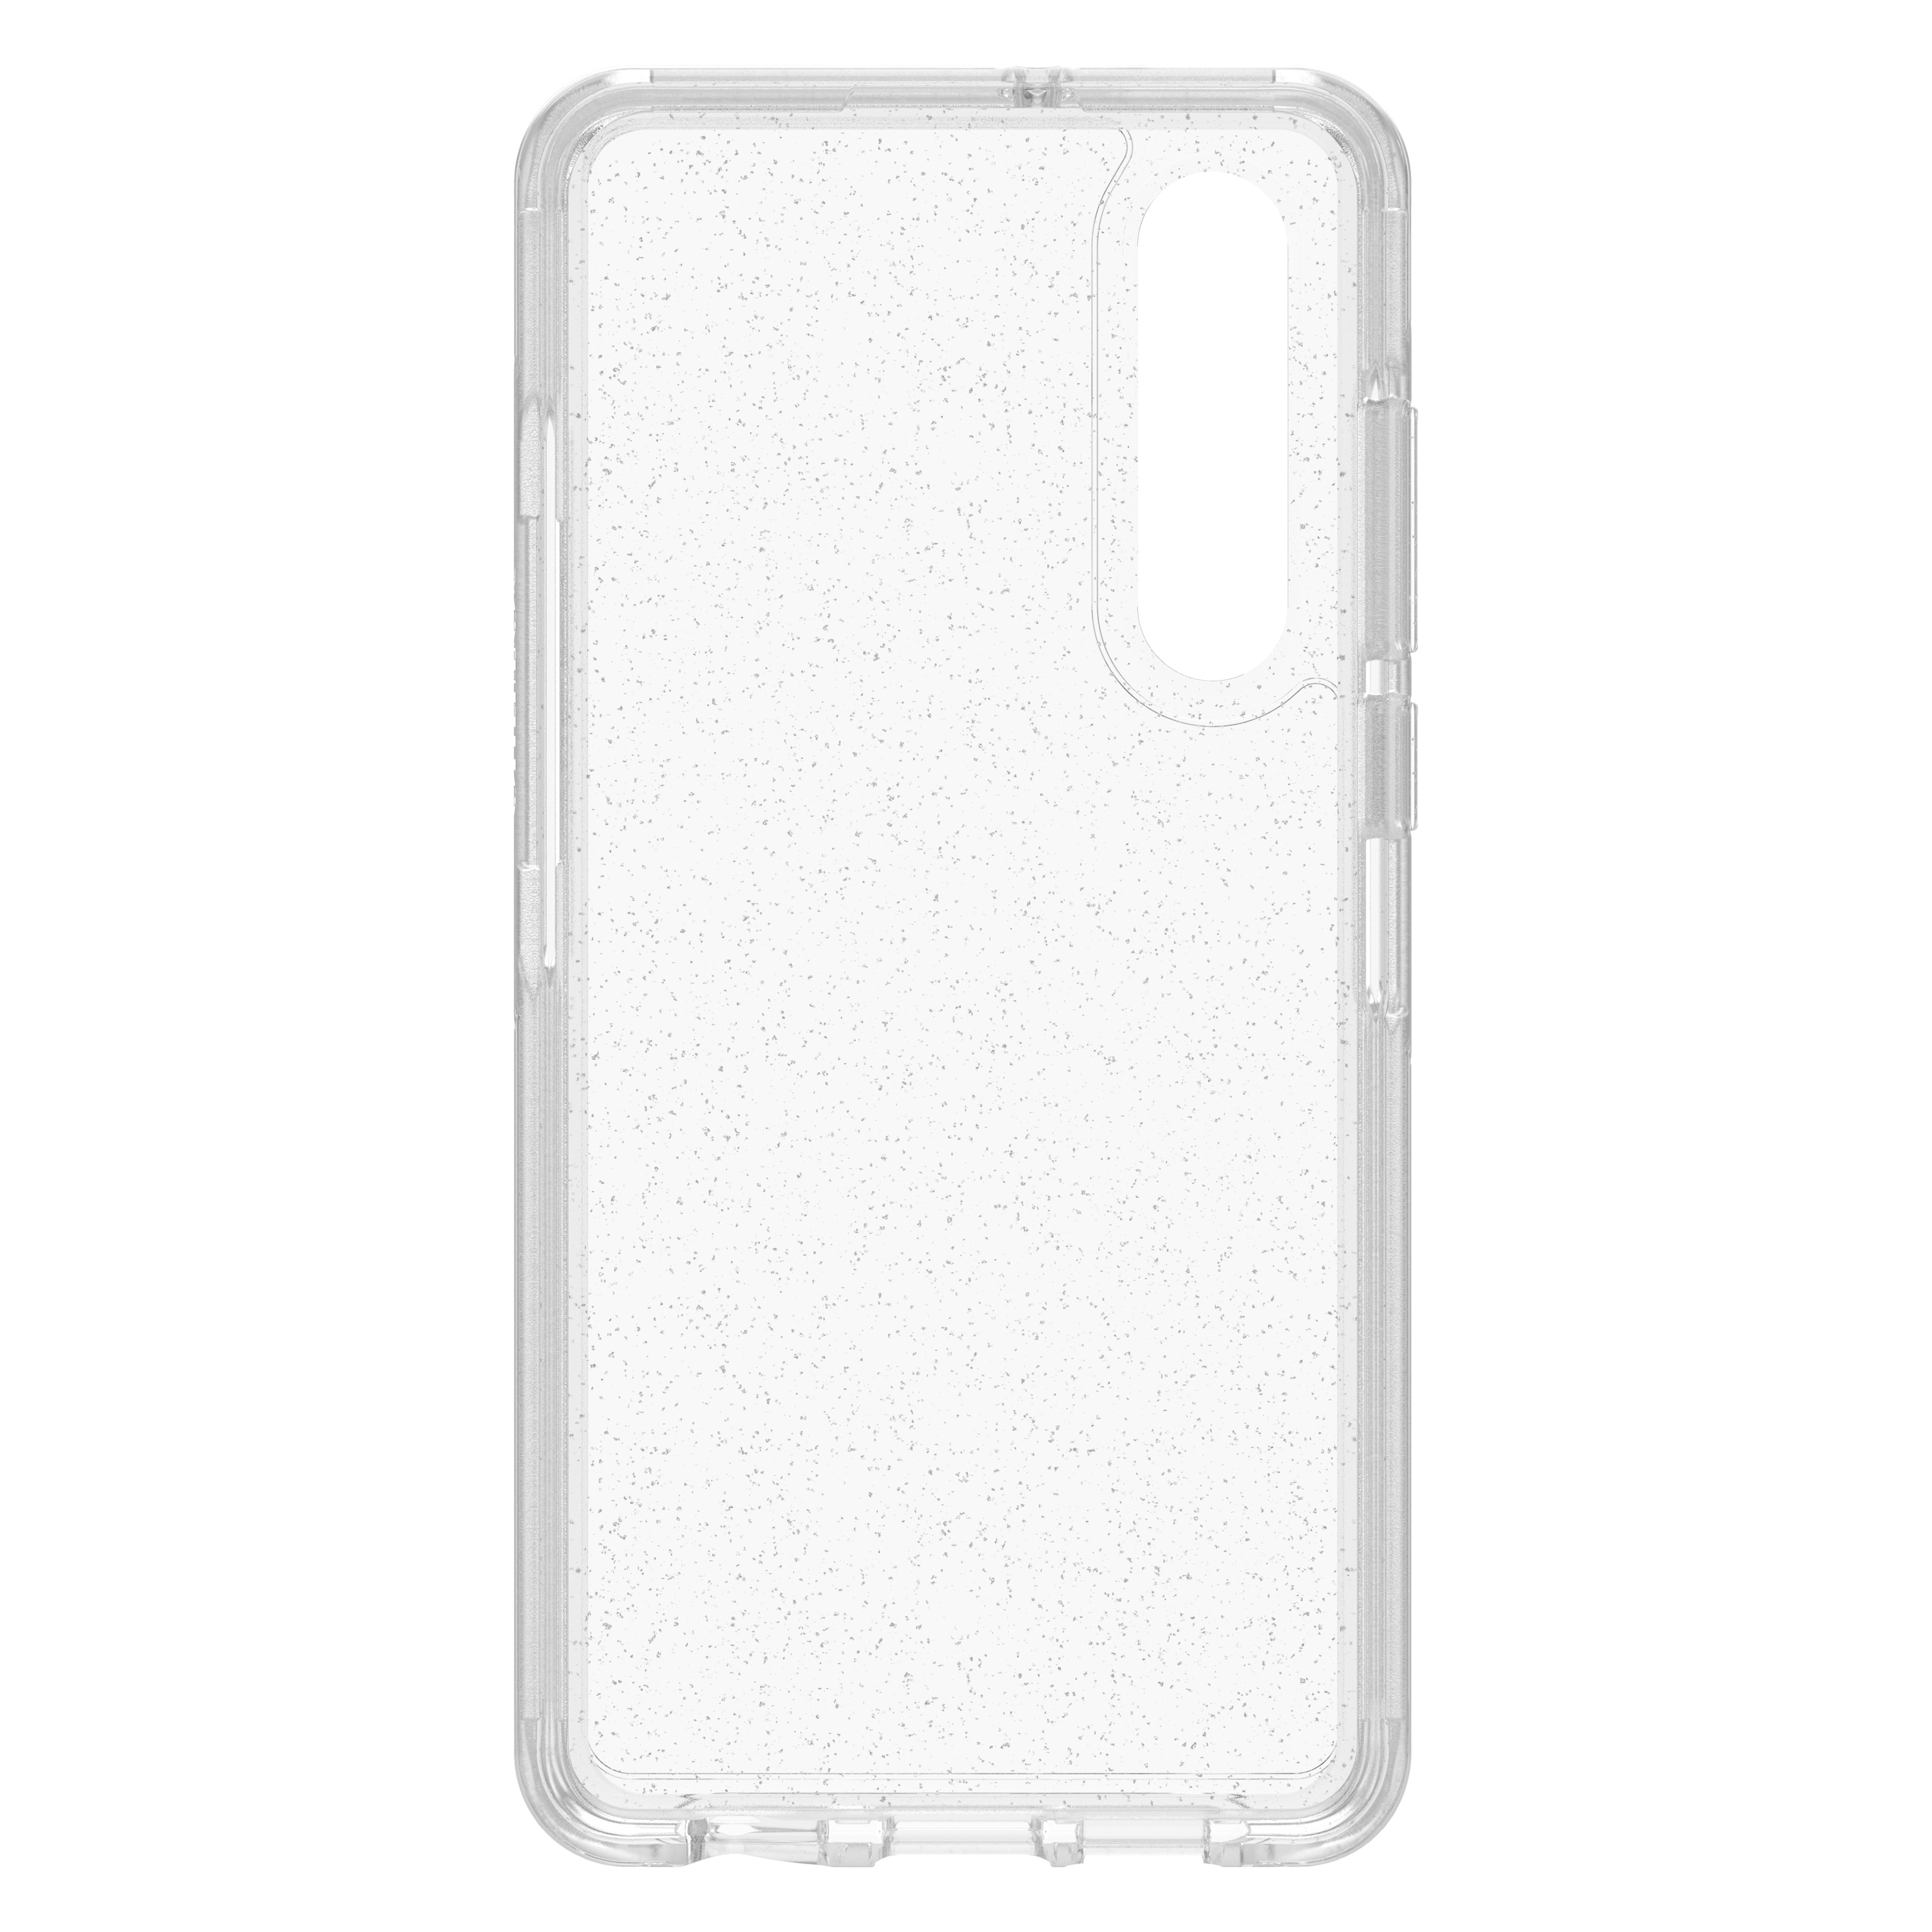 Backcover, Transparent Huawei, Symmetry, P30, OTTERBOX